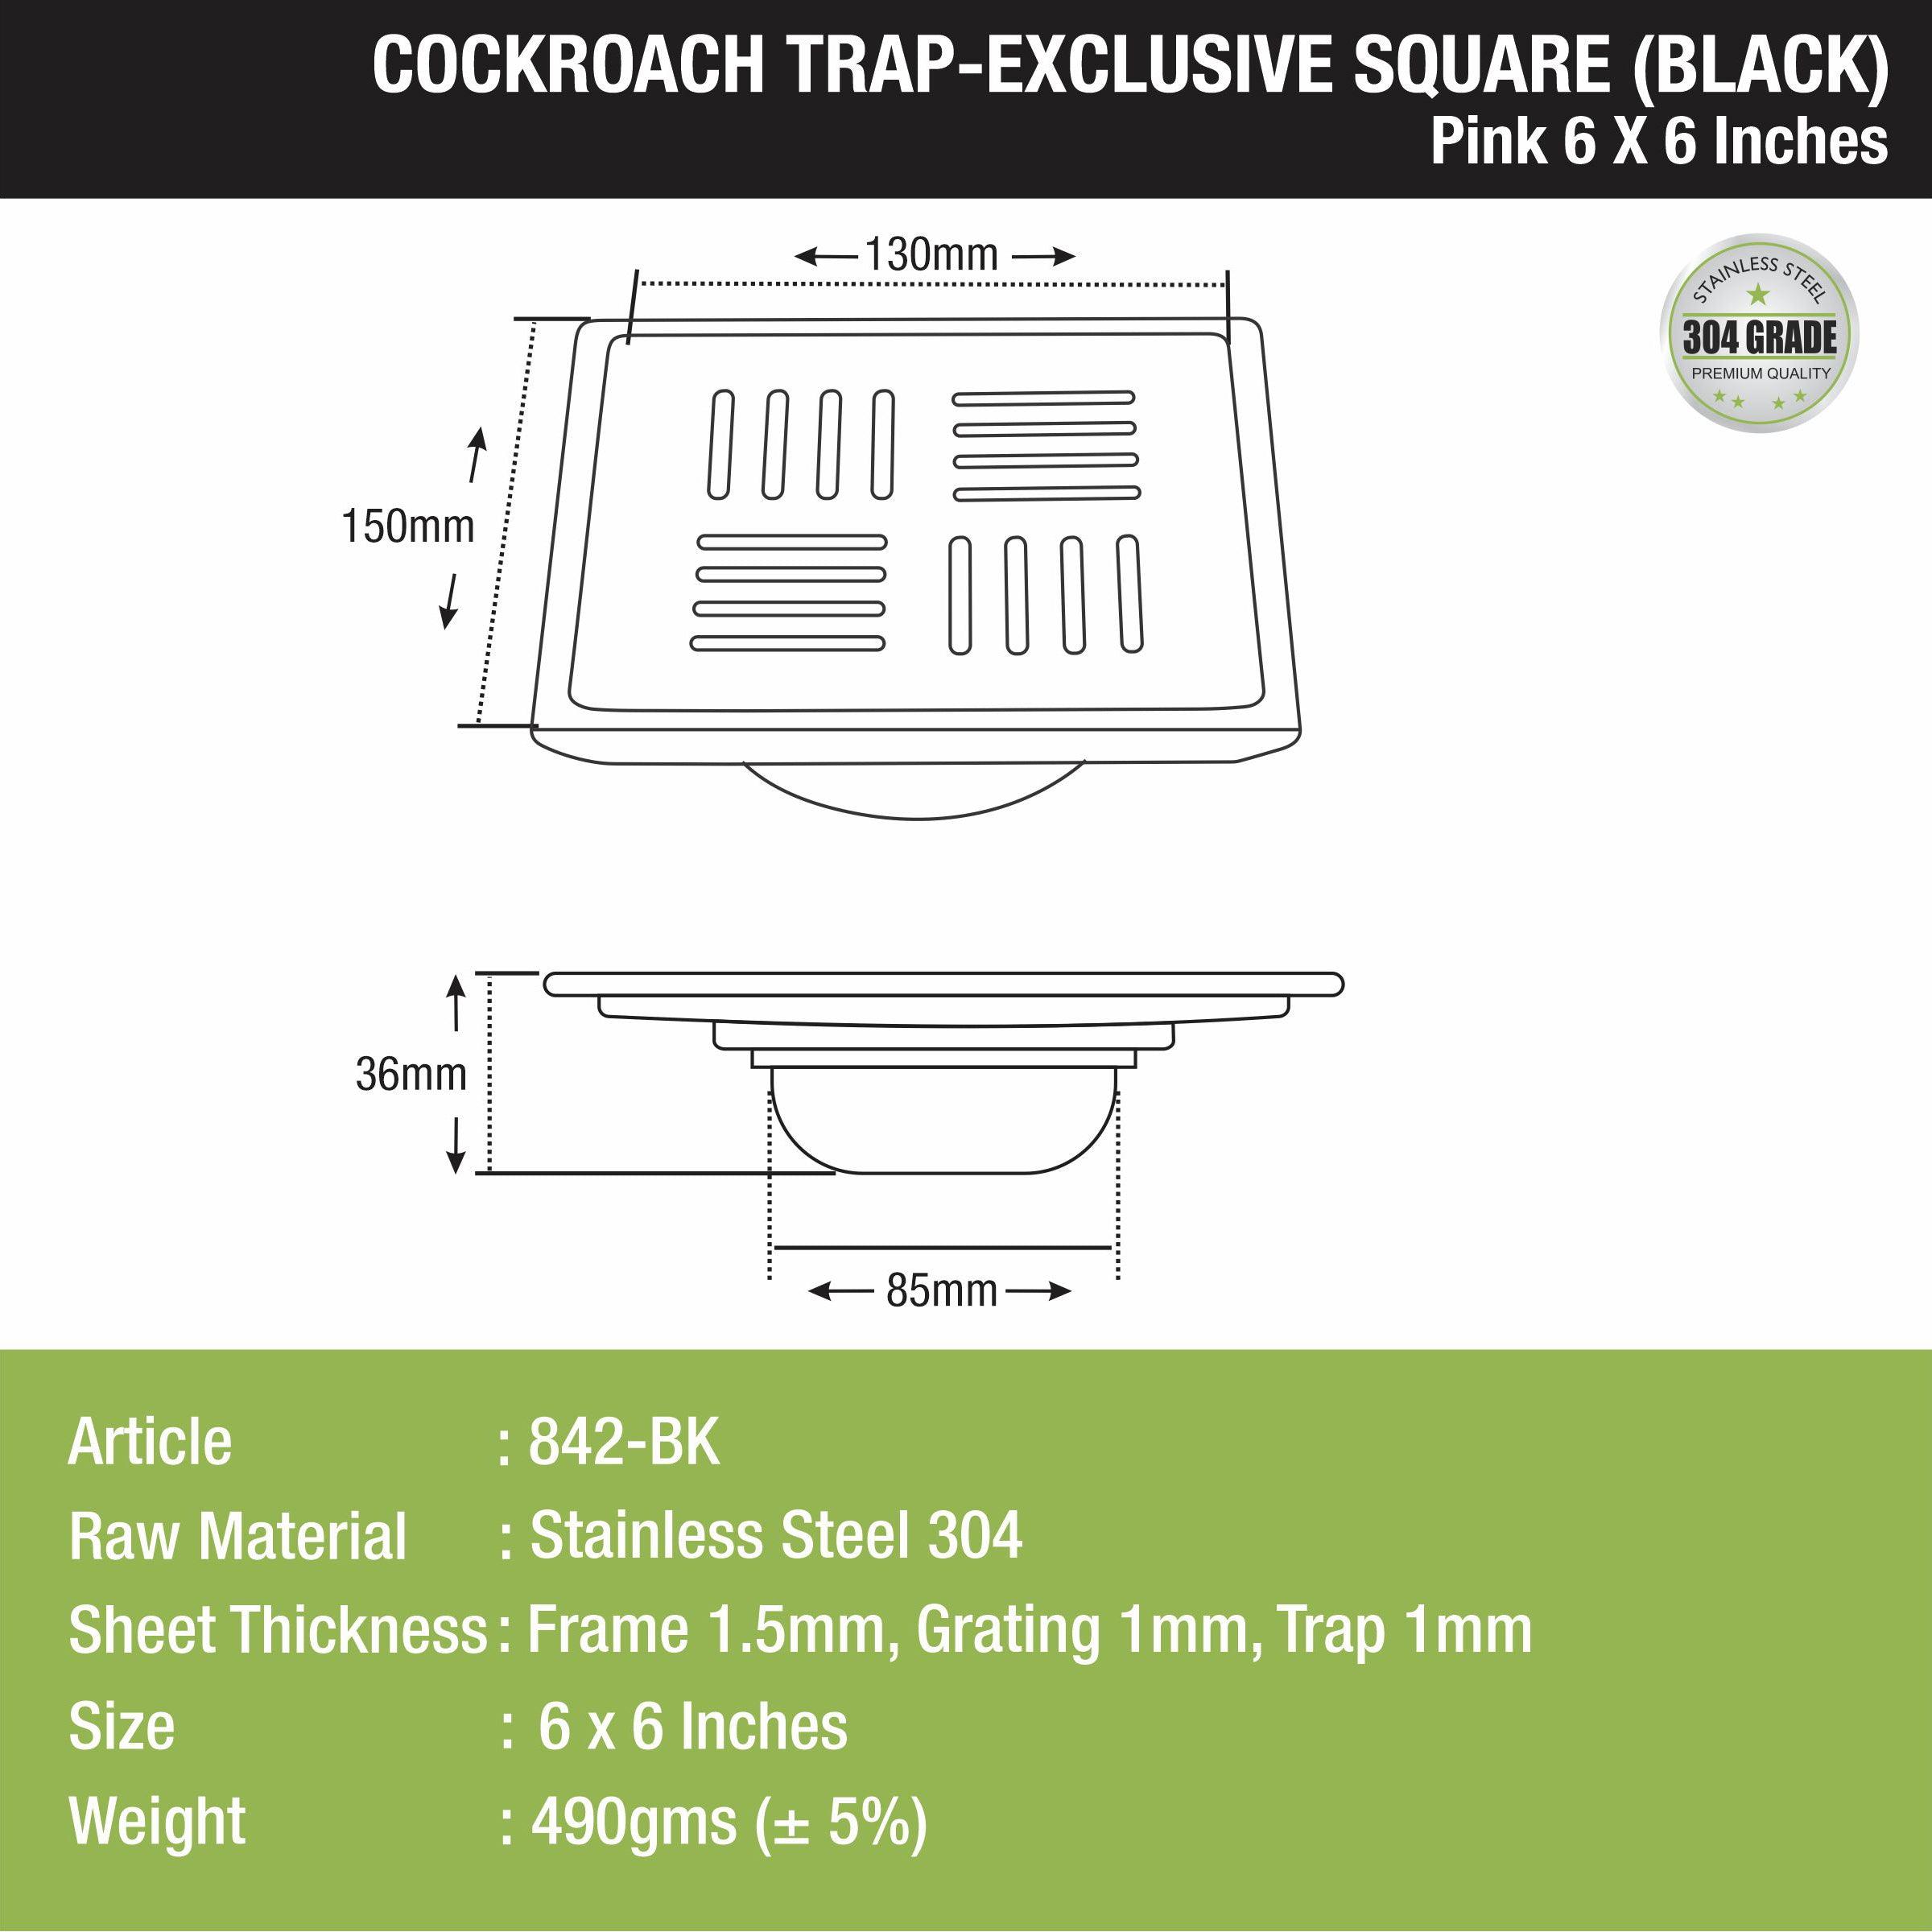 Pink Exclusive Square Floor Drain in Black PVD Coating (6 x 6 Inches) with Cockroach Trap size and measurement